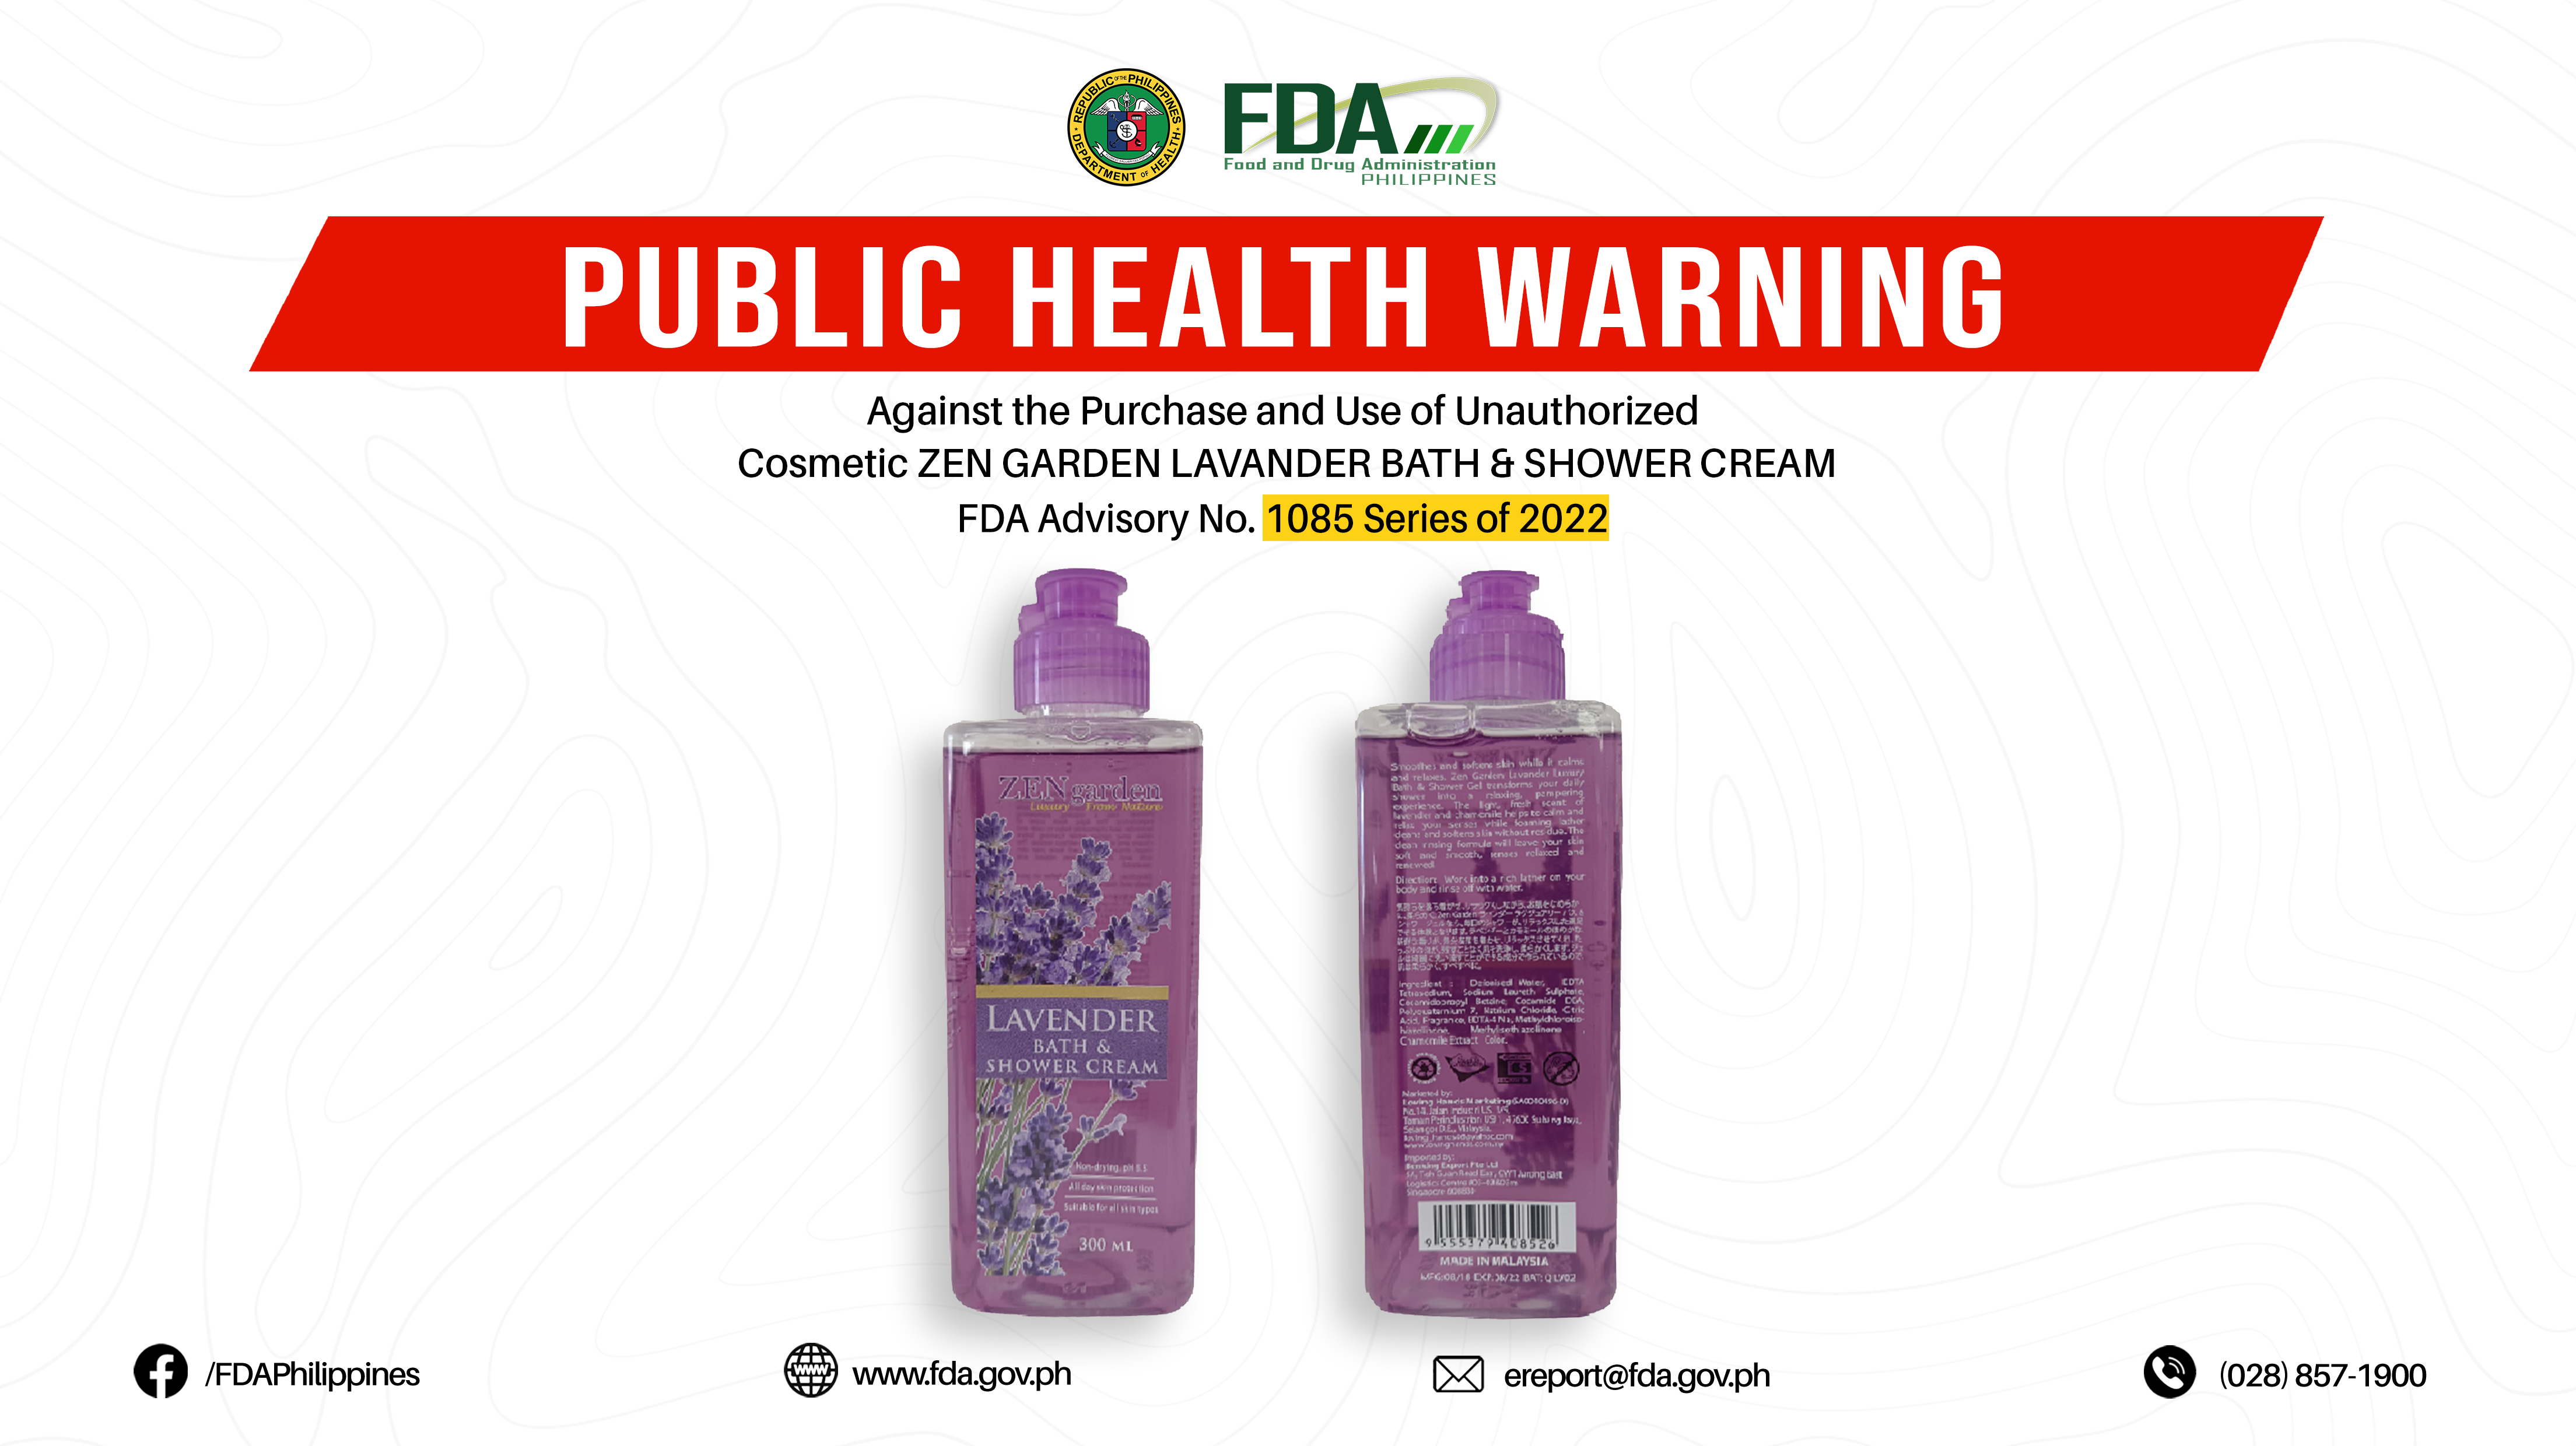 FDA Advisory No.2022-1085 || Public Health Warning Against the Purchase and Use of Unauthorized Cosmetic ZEN GARDEN LAVANDER BATH & SHOWER CREAM